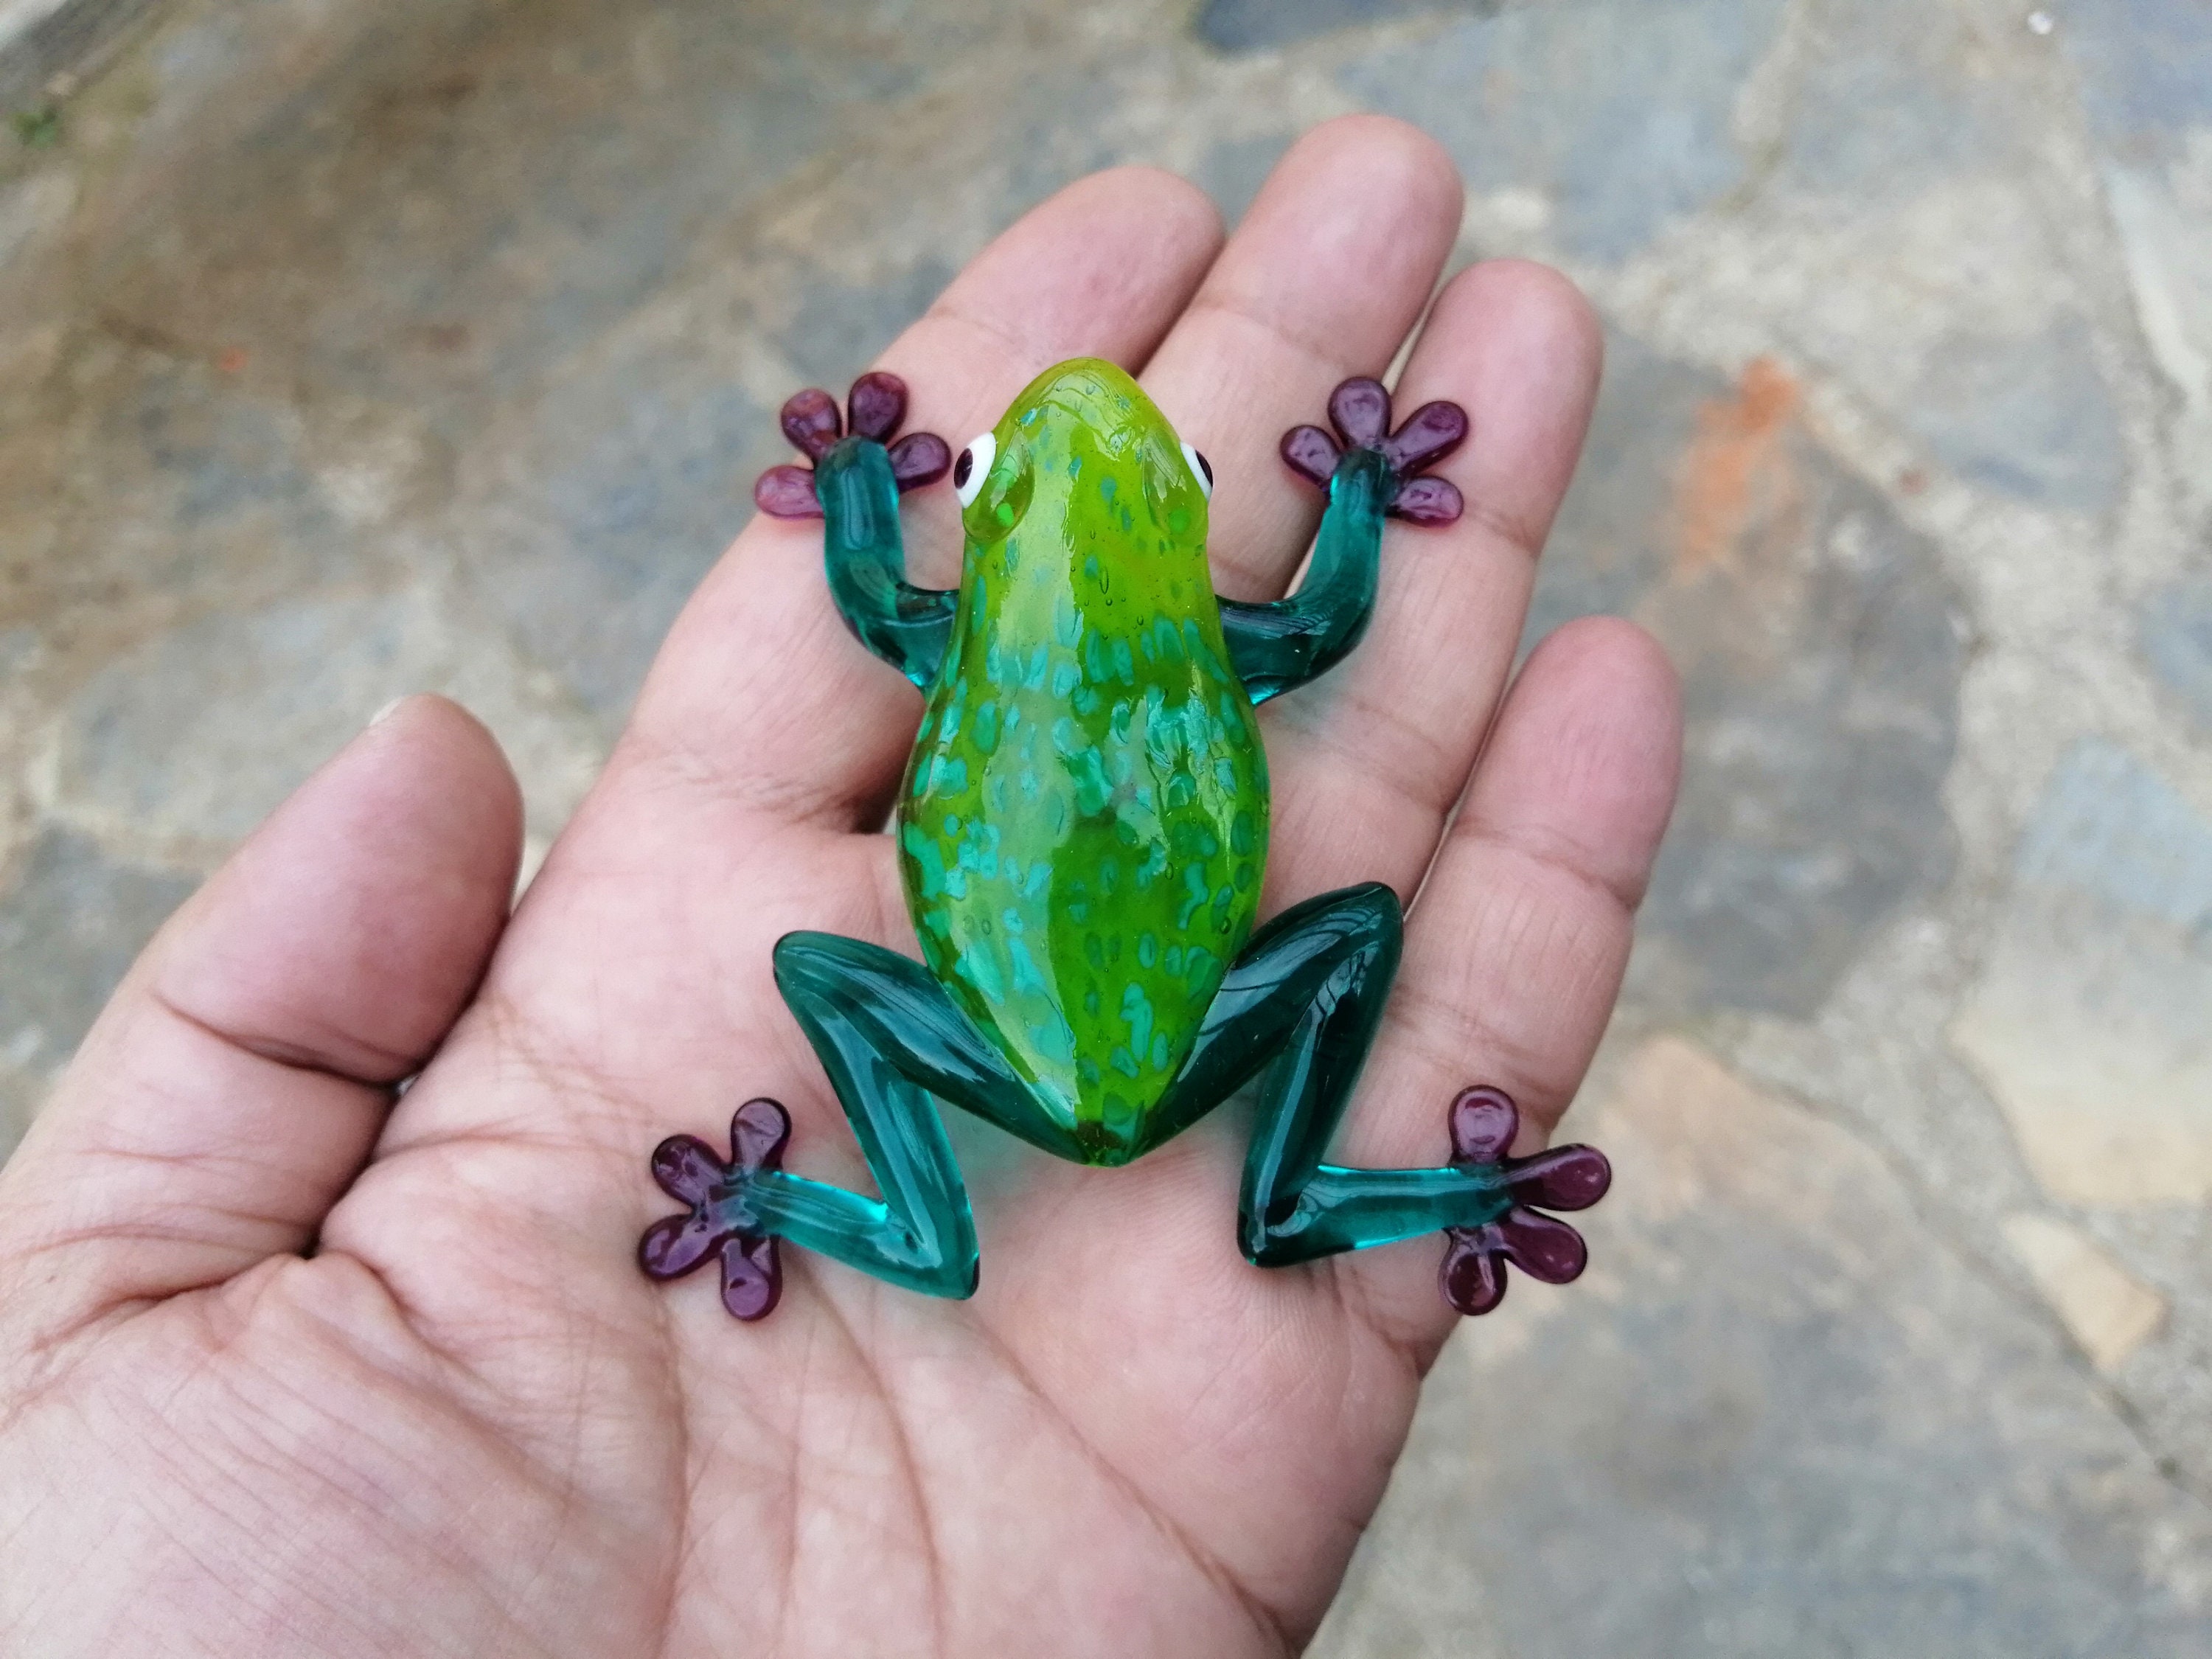 Frog Gifts Frog Figurine Tiny Frog Miniature, Mini Glass Frog Figurine,  Micro Frog Sculpture, Small Reptile Figure Frog Ornament Frog Decor -   Canada